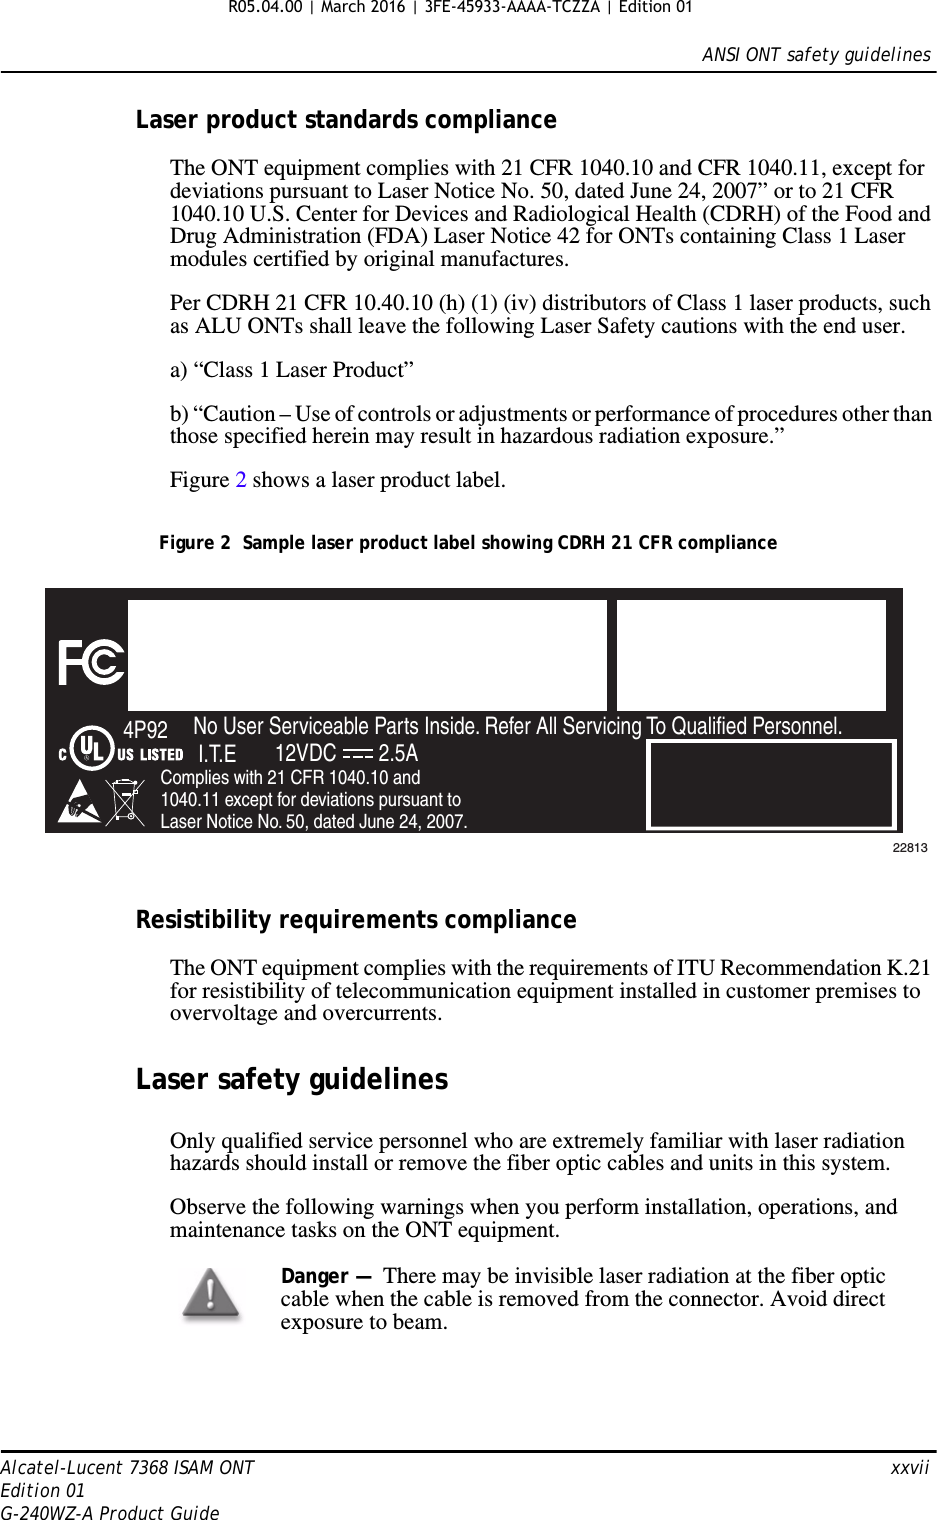 ANSI ONT safety guidelinesAlcatel-Lucent 7368 ISAM ONT   xxviiEdition 01G-240WZ-A Product GuideLaser product standards complianceThe ONT equipment complies with 21 CFR 1040.10 and CFR 1040.11, except for deviations pursuant to Laser Notice No. 50, dated June 24, 2007” or to 21 CFR 1040.10 U.S. Center for Devices and Radiological Health (CDRH) of the Food and Drug Administration (FDA) Laser Notice 42 for ONTs containing Class 1 Laser modules certified by original manufactures.Per CDRH 21 CFR 10.40.10 (h) (1) (iv) distributors of Class 1 laser products, such as ALU ONTs shall leave the following Laser Safety cautions with the end user.a) “Class 1 Laser Product”b) “Caution – Use of controls or adjustments or performance of procedures other than those specified herein may result in hazardous radiation exposure.”Figure 2 shows a laser product label.Figure 2  Sample laser product label showing CDRH 21 CFR complianceResistibility requirements complianceThe ONT equipment complies with the requirements of ITU Recommendation K.21 for resistibility of telecommunication equipment installed in customer premises to overvoltage and overcurrents.Laser safety guidelinesOnly qualified service personnel who are extremely familiar with laser radiation hazards should install or remove the fiber optic cables and units in this system.Observe the following warnings when you perform installation, operations, and maintenance tasks on the ONT equipment.FiOS EnabledTo Order FiOS: 888 GET-FiOSor visit Verizon.comFor Service: 888 553-15552301 Sugar Bush Rd.Raleigh, NC 27612No User Serviceable Parts Inside. Refer All Servicing To Qualified Personnel.Complies with 21 CFR 1040.10 and 1040.11 except for deviations pursuant to Laser Notice No. 50, dated June 24, 2007.4P92I.T.E 12VDC 2.5A22813Danger —  There may be invisible laser radiation at the fiber optic cable when the cable is removed from the connector. Avoid direct exposure to beam.R05.04.00 | March 2016 | 3FE-45933-AAAA-TCZZA | Edition 01 